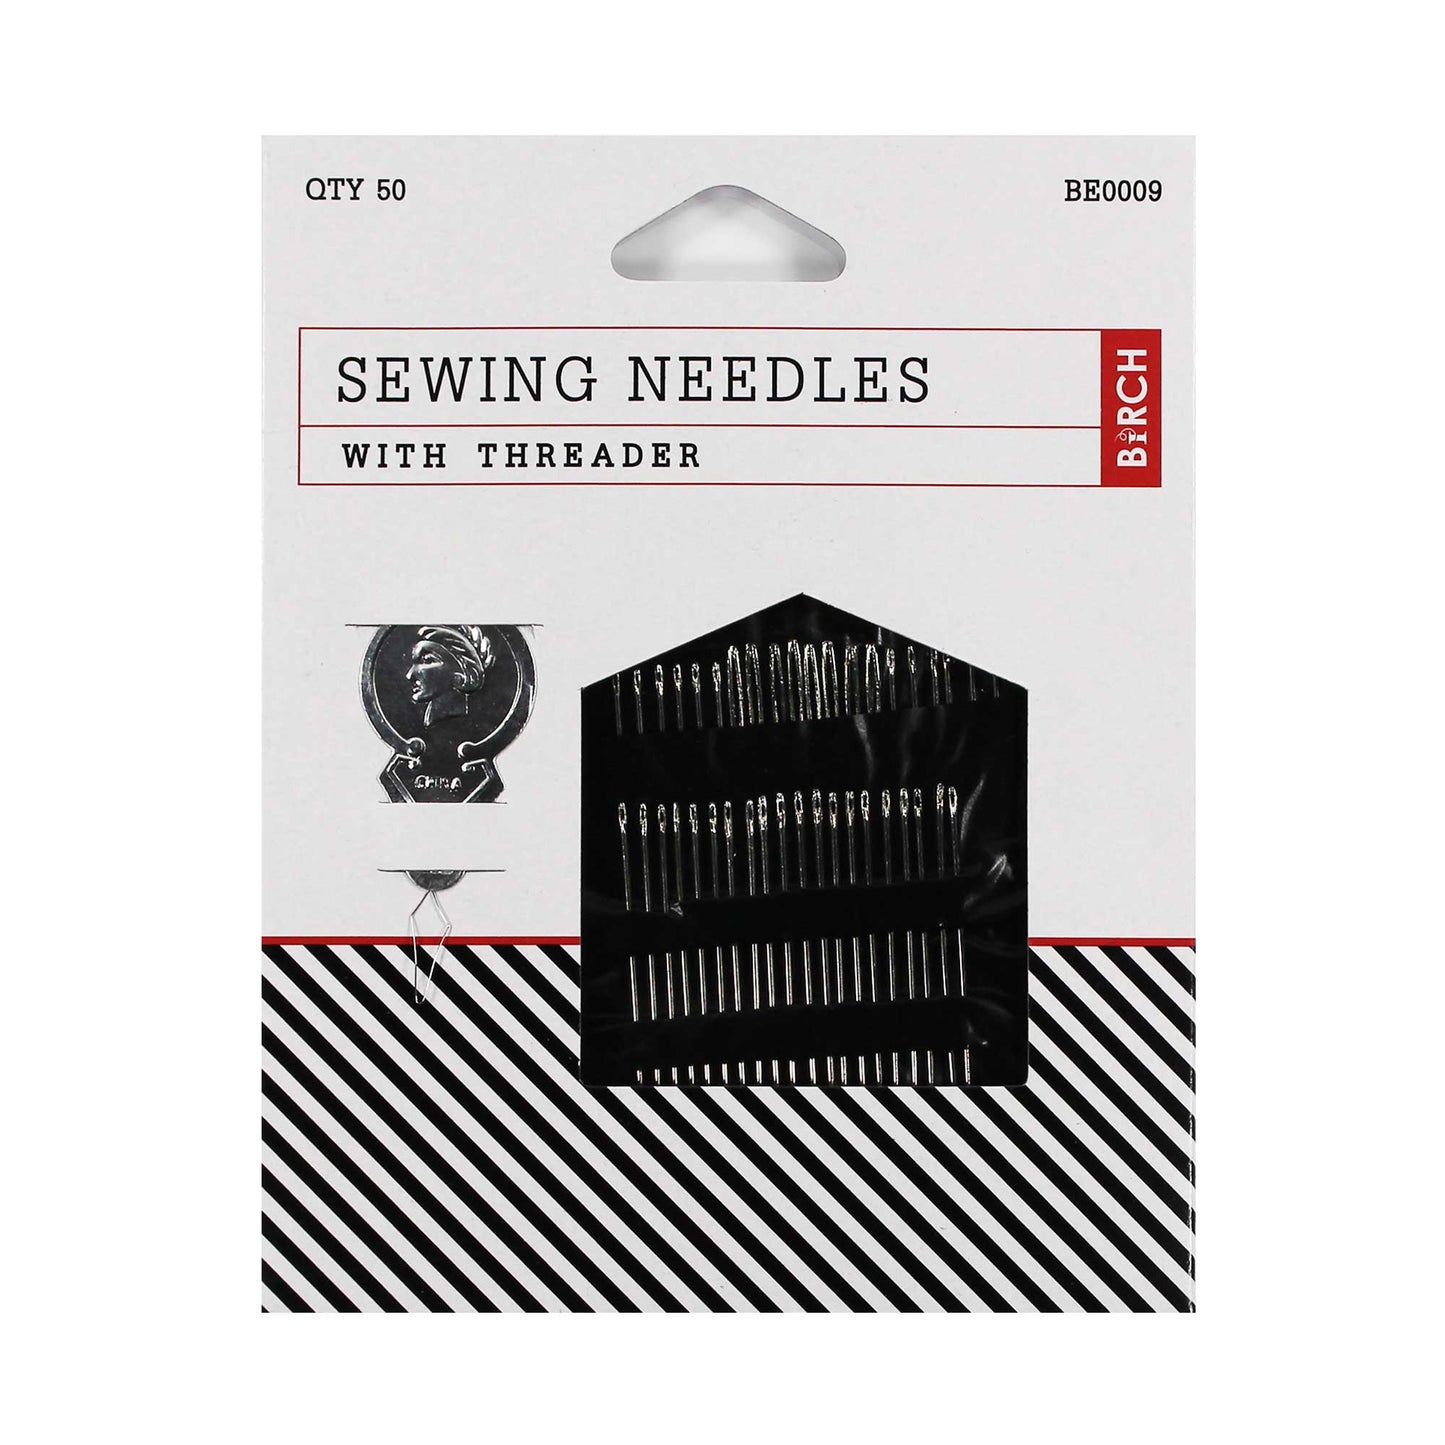 Birch Sewing Needles with Threader (BE0009)